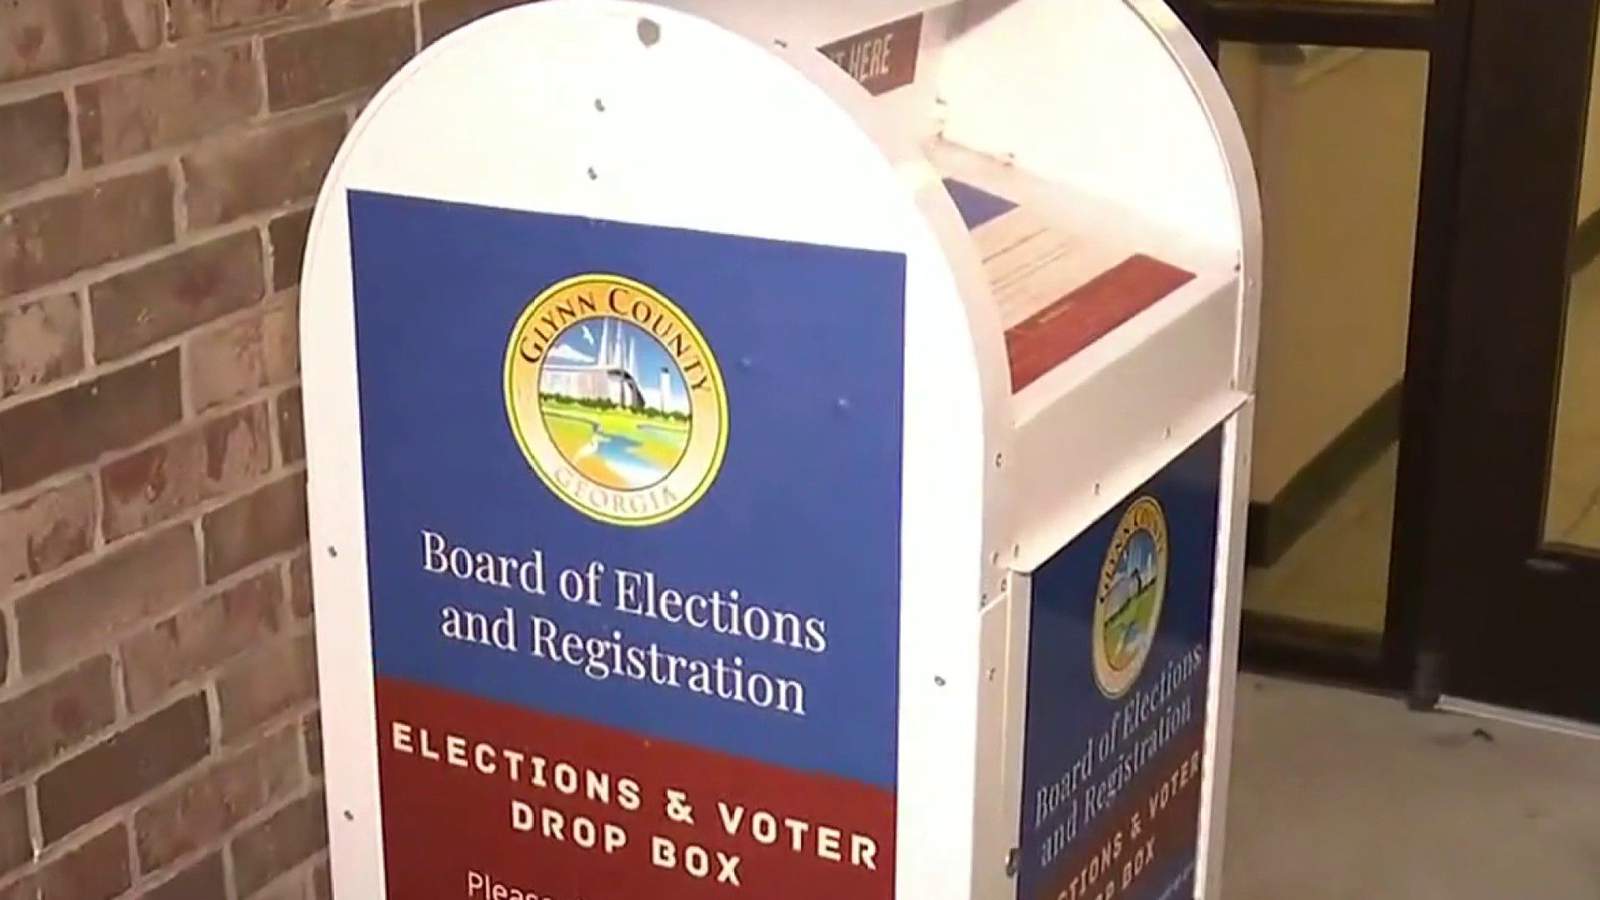 Glynn County poll workers expect at least 13,000 more voters Tuesday